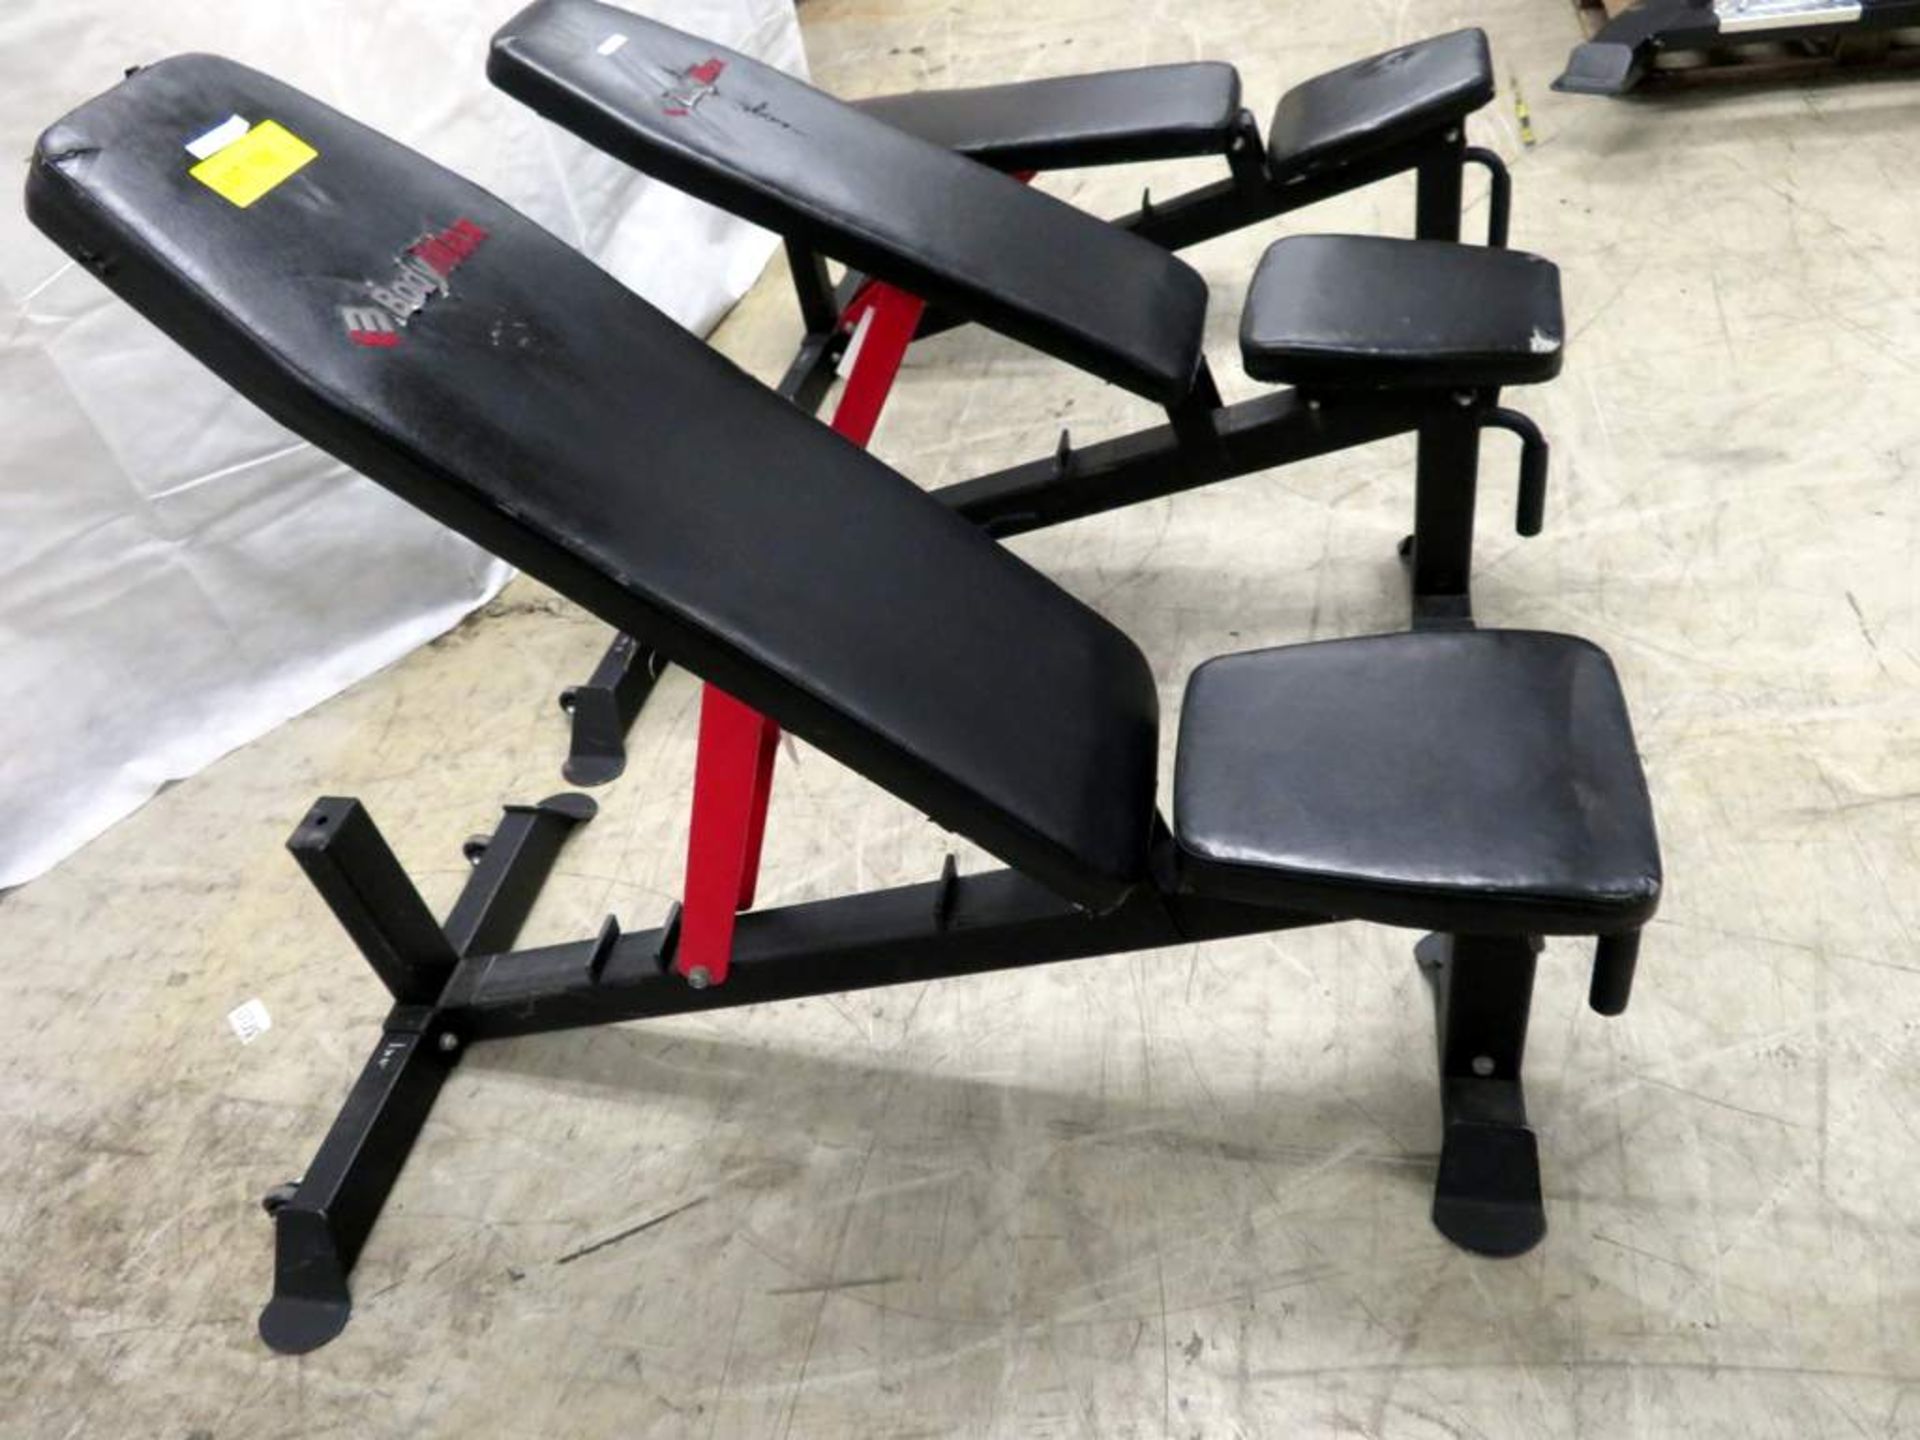 3x Body Max Adjustable Horizontal To Incline Bench - Image 5 of 7